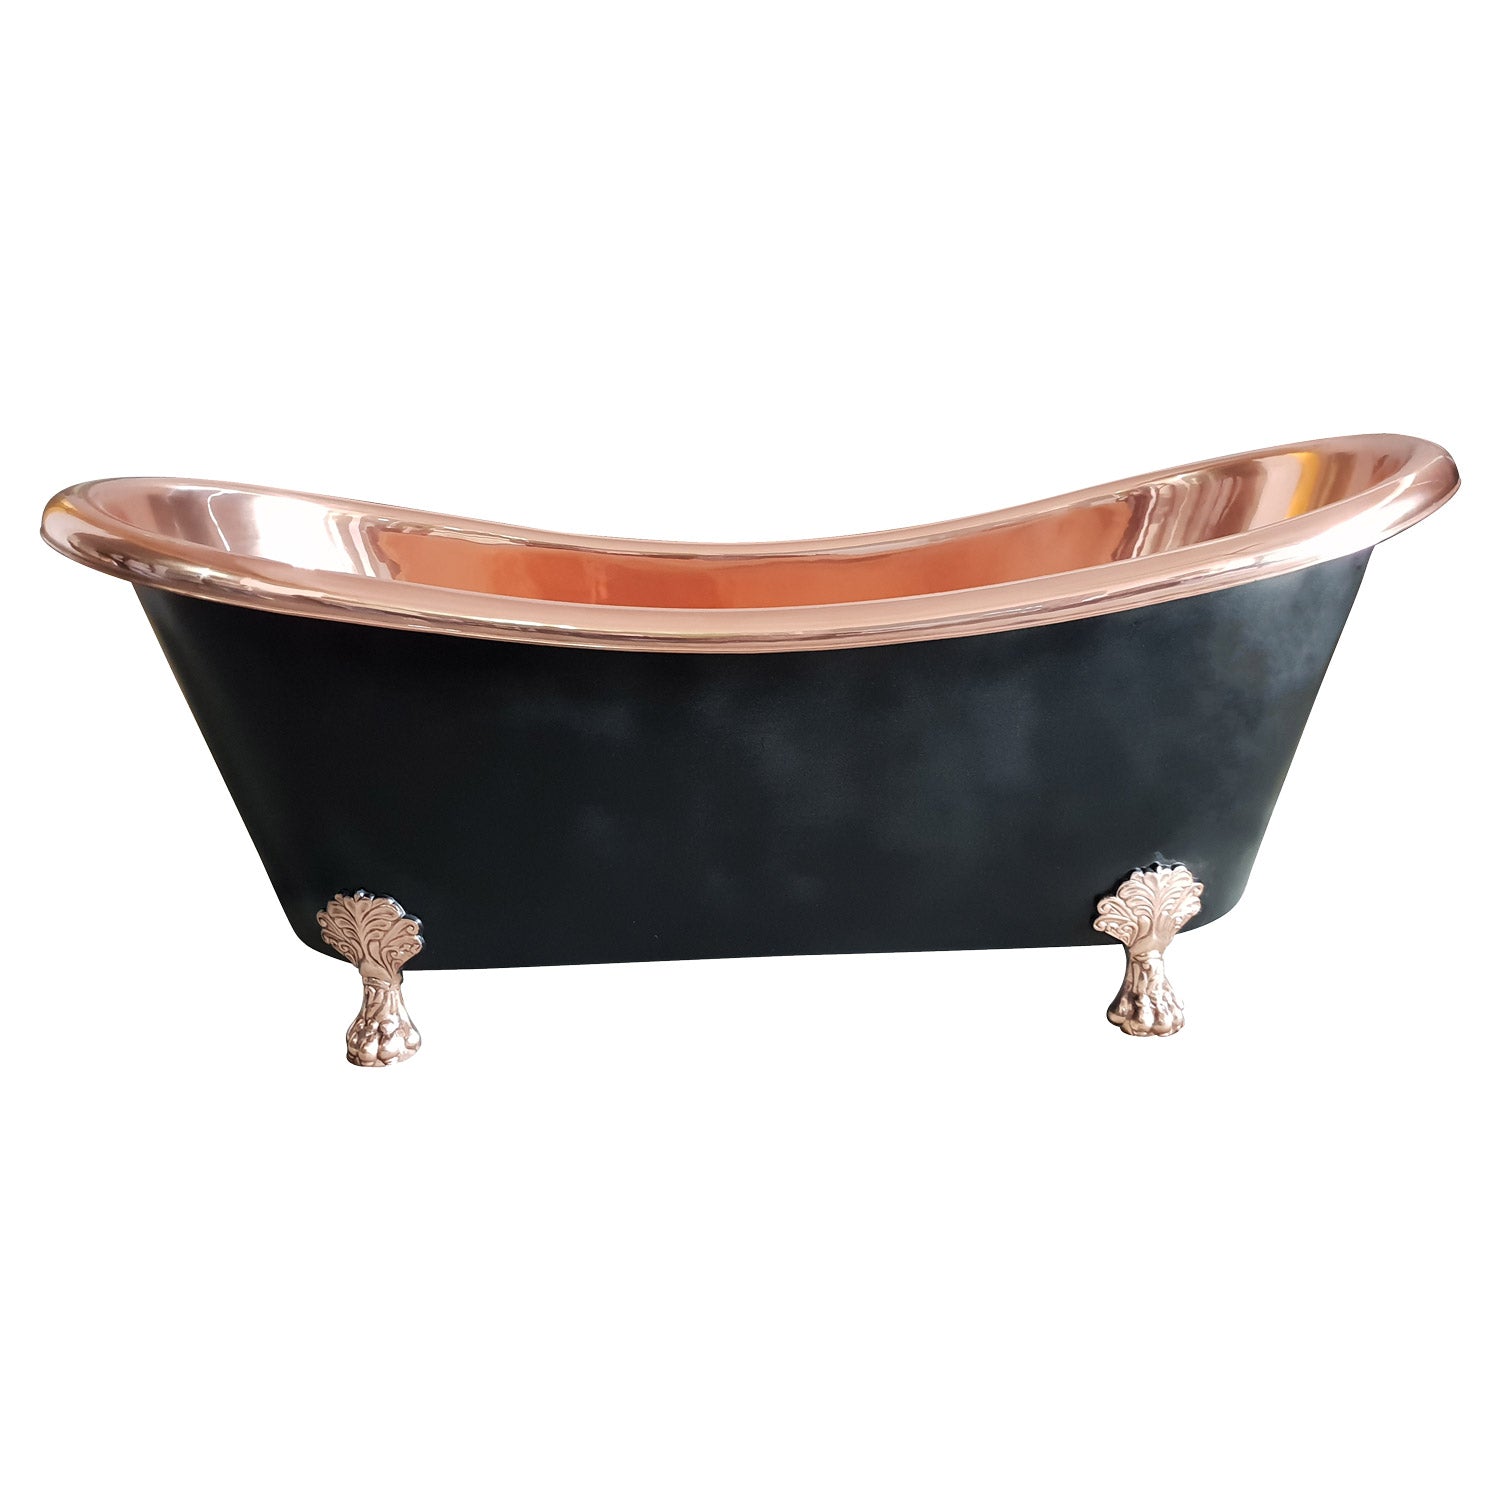 Coppersmith Creations Copper Black Exterior Clawfoot Freestanding Bath